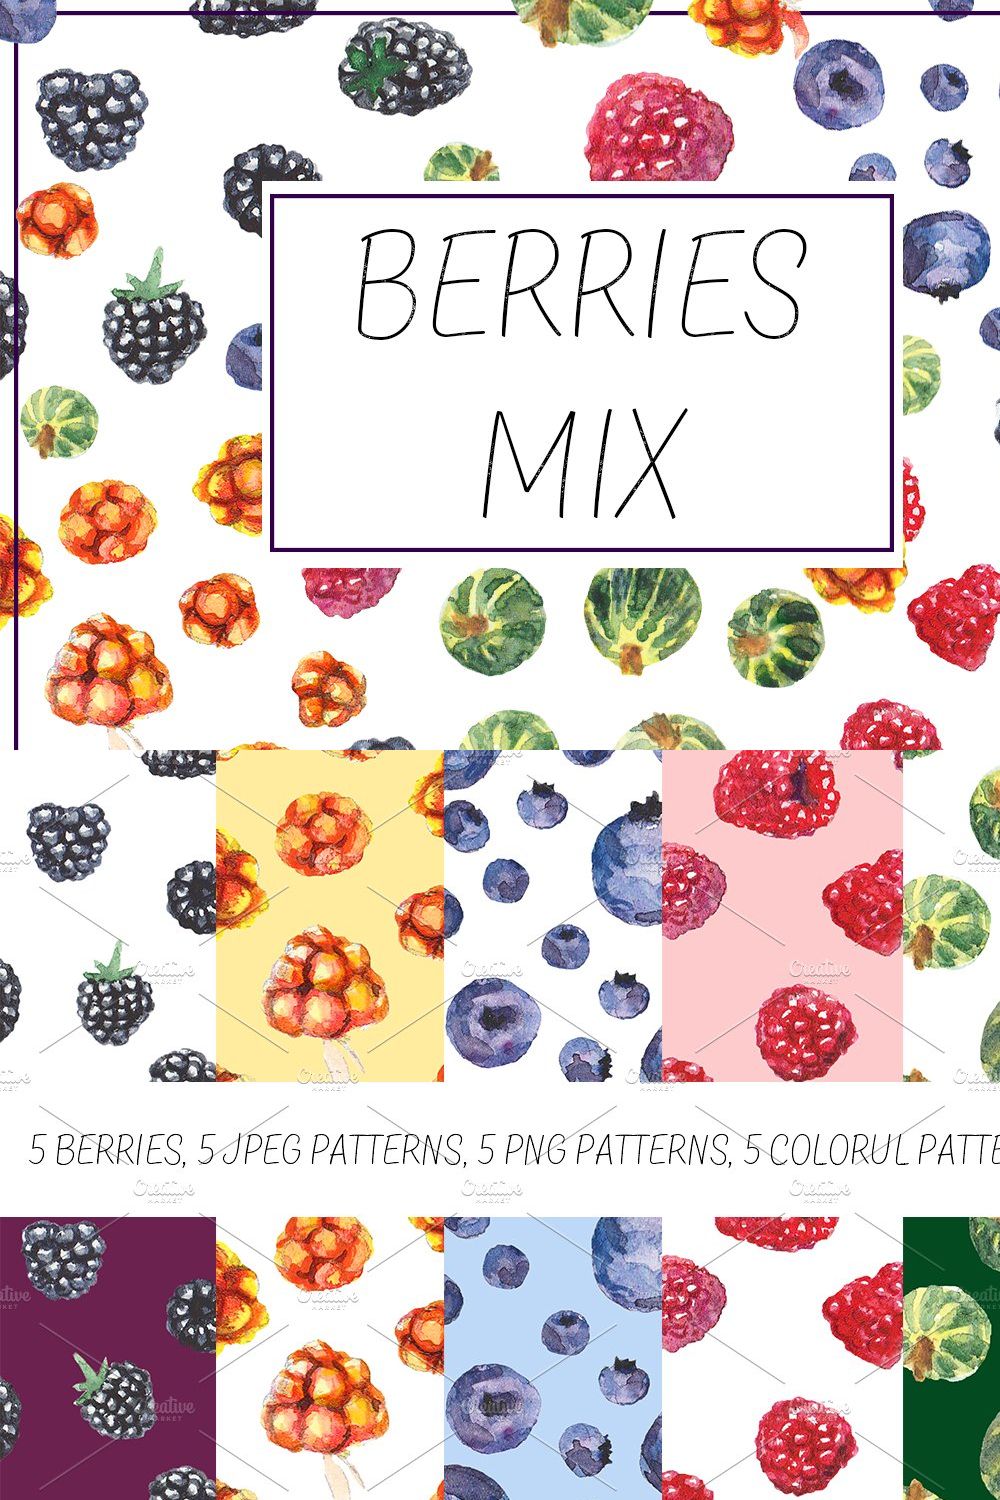 Berries mix pinterest preview image.